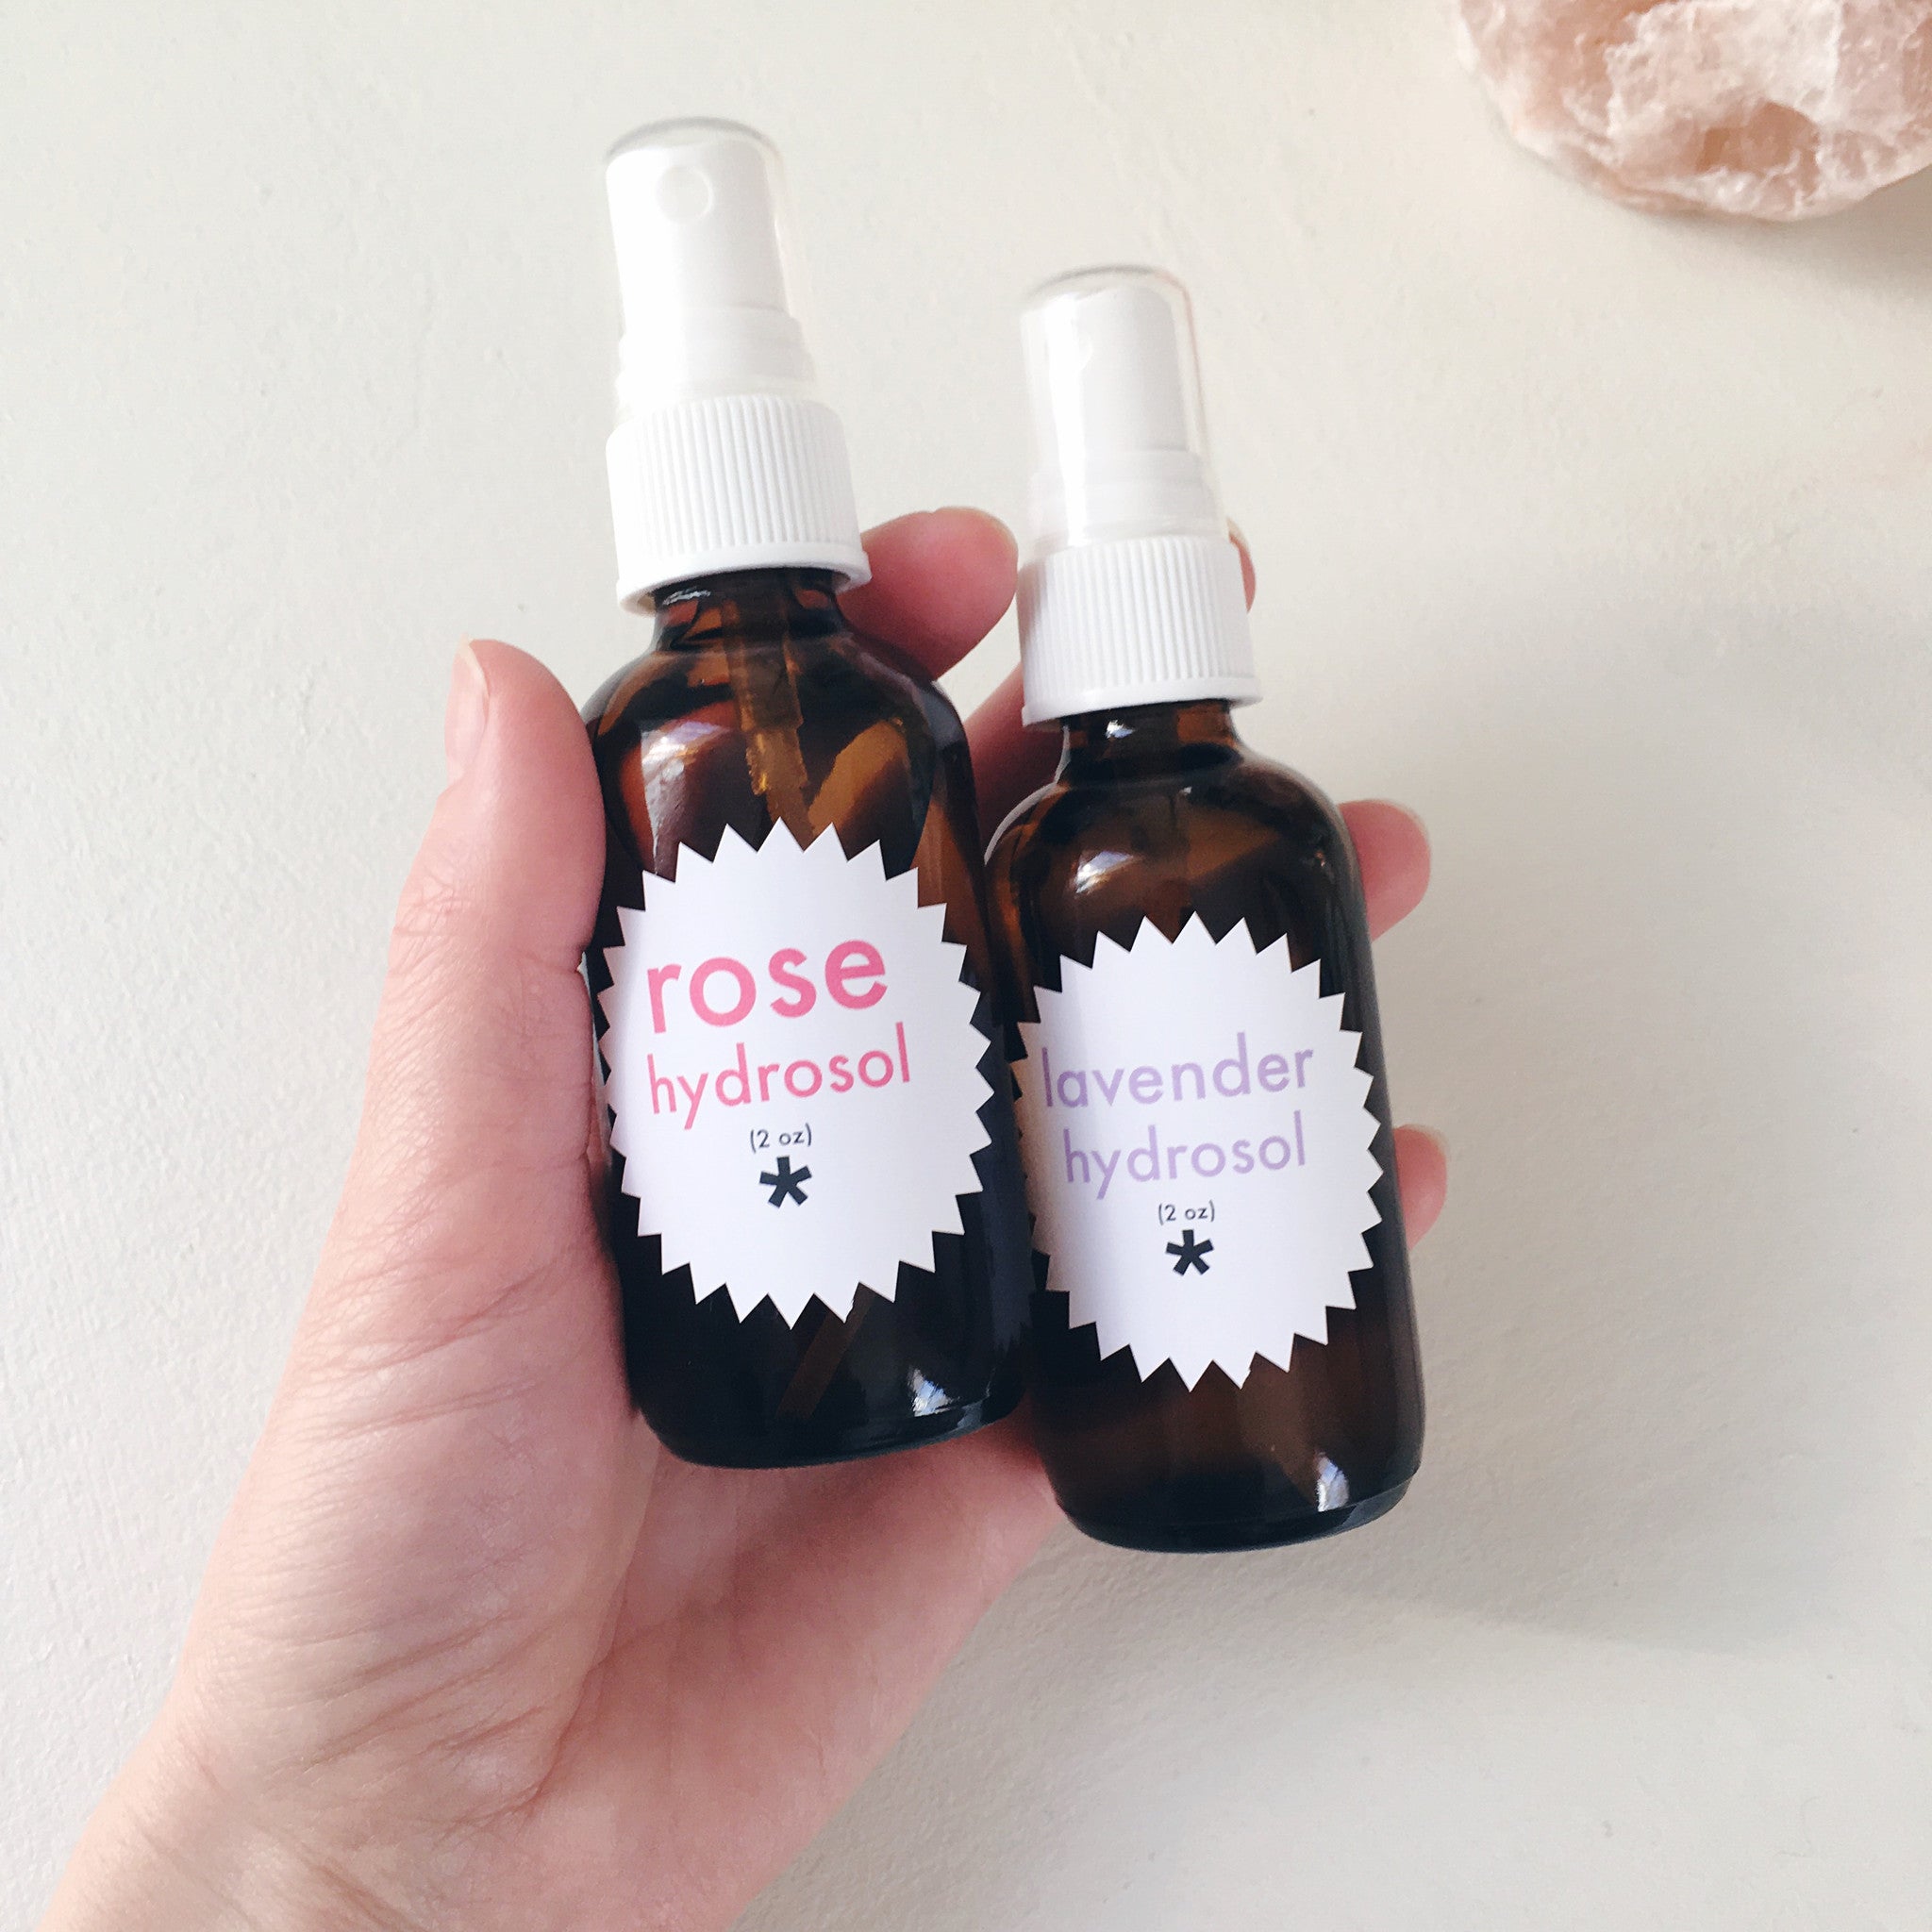 Rose and lavender hydrosol twinkle apothecary 